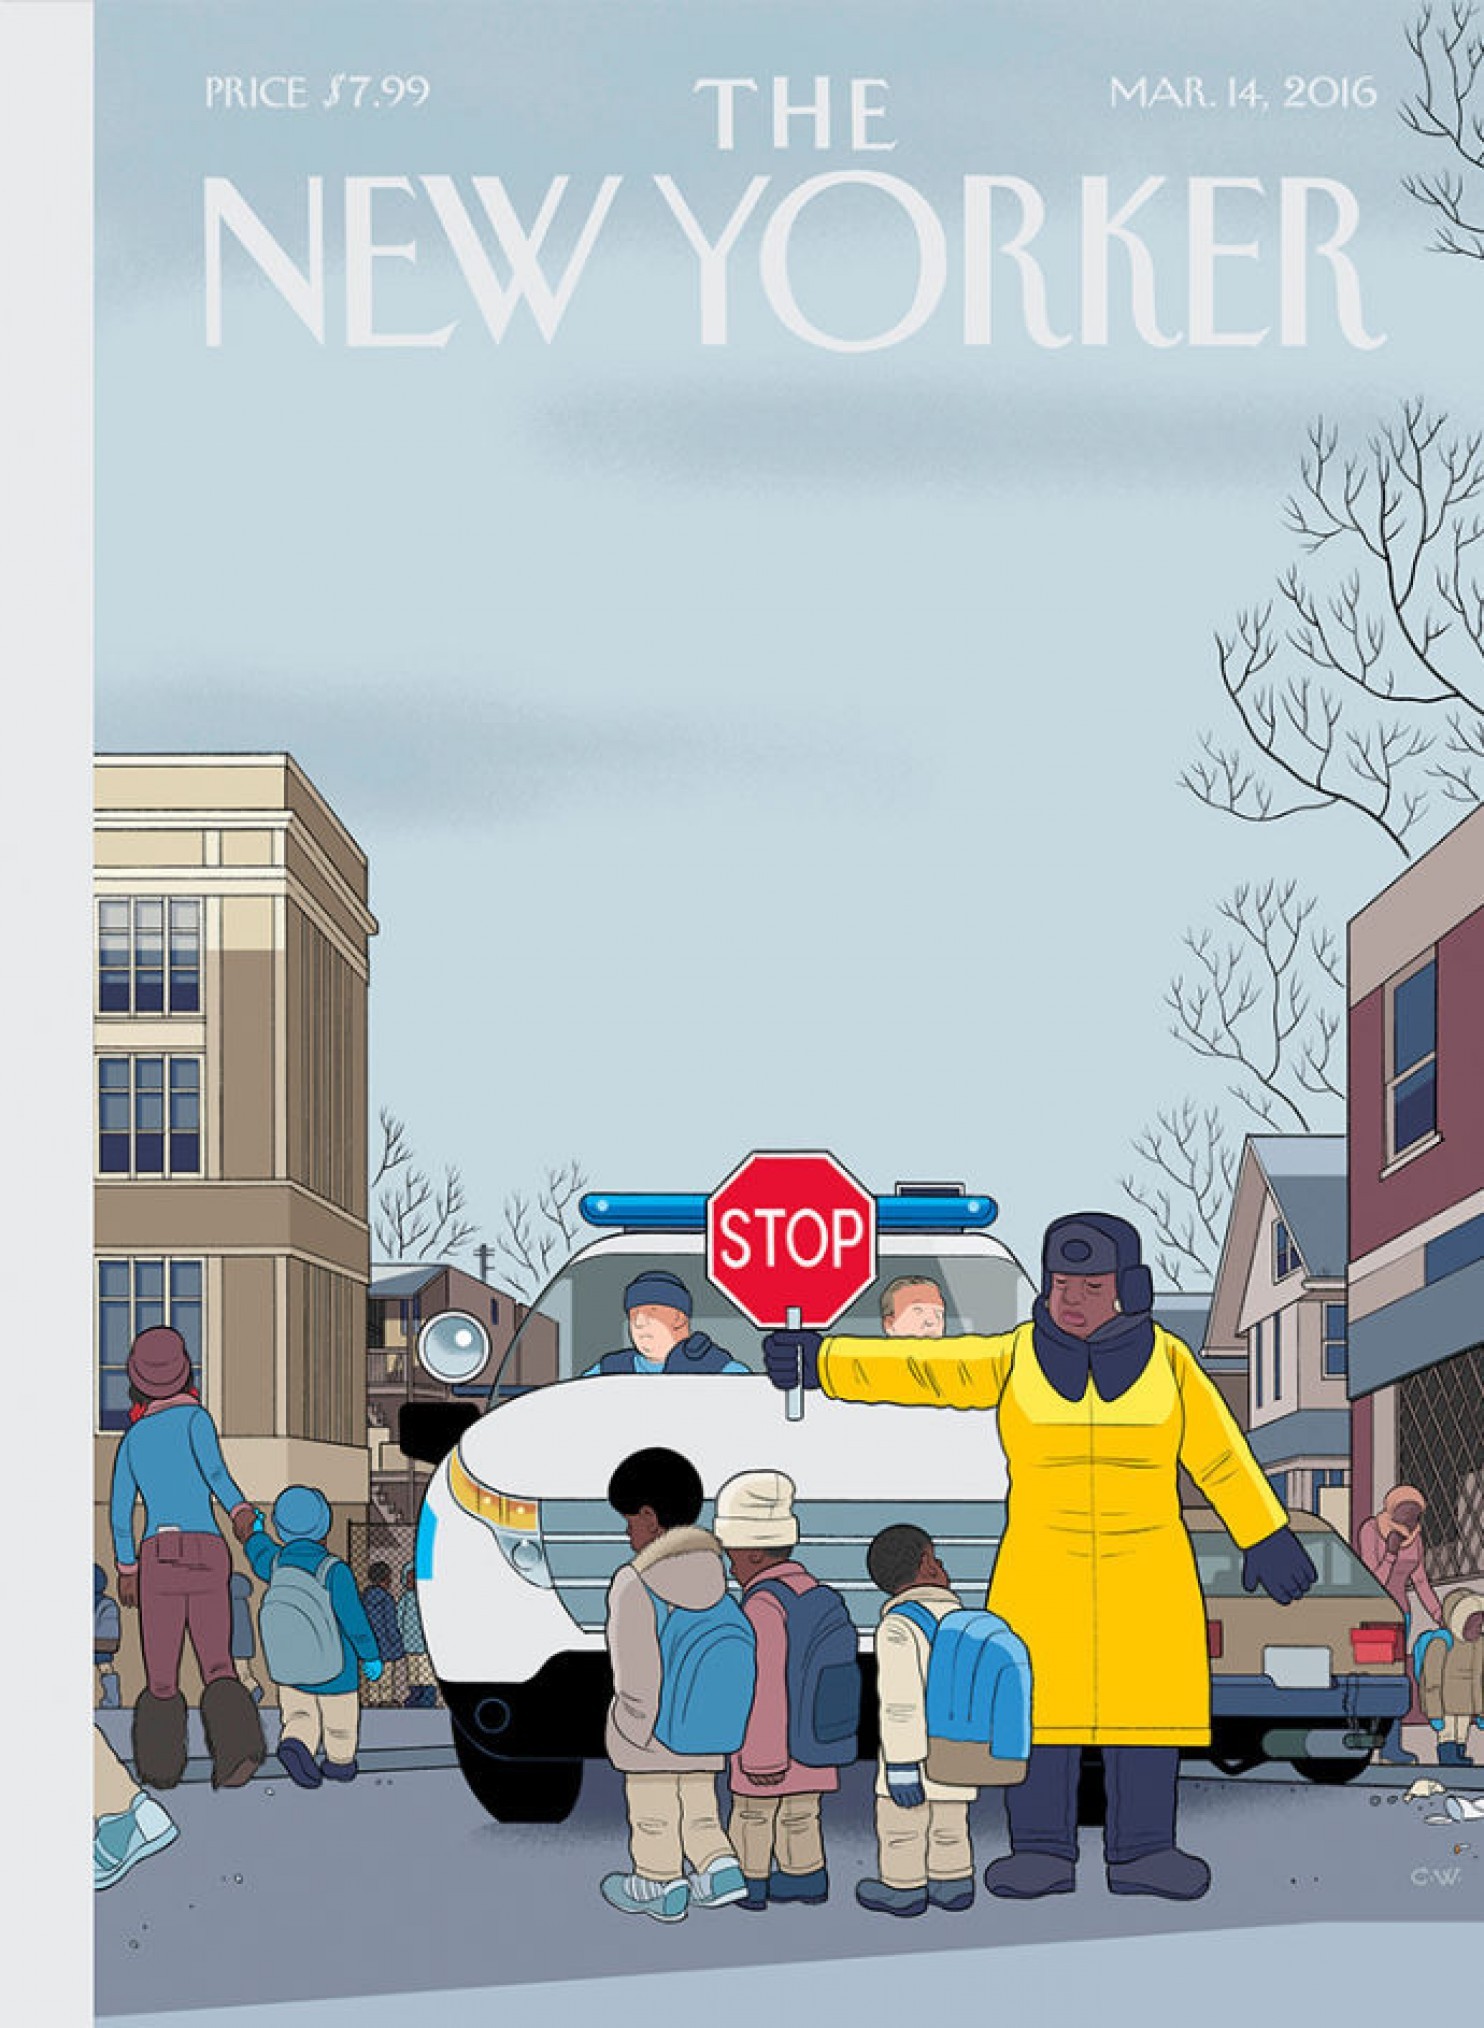 New Yorker's Latest Moving Cover